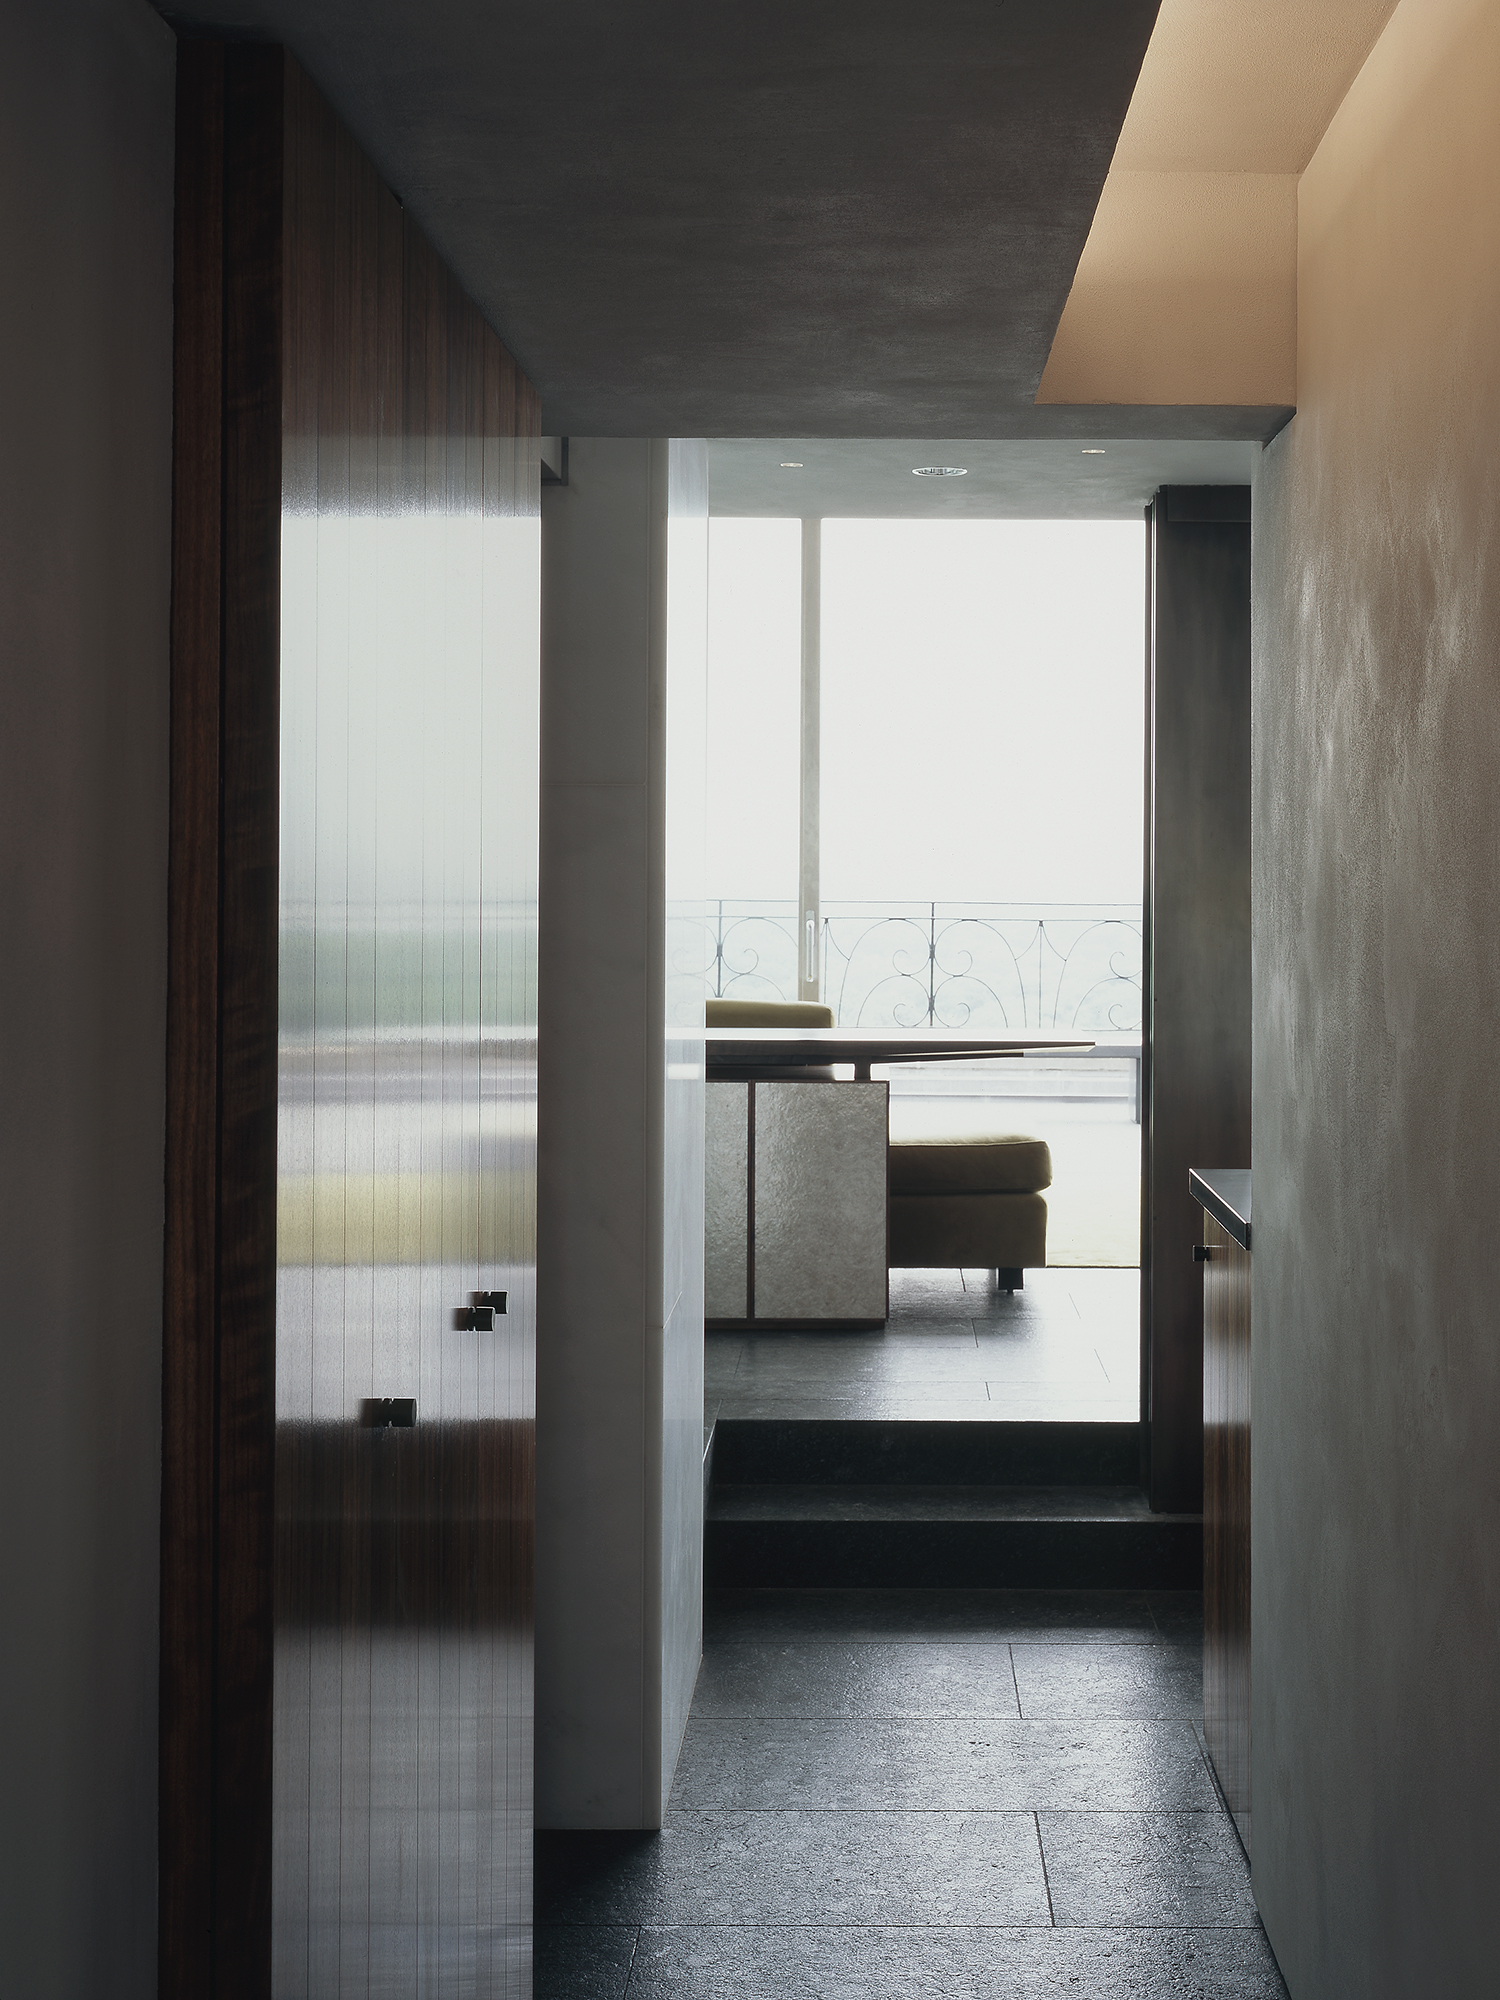  Central Park Residence  Tod Williams Billie Tsien Architecture    